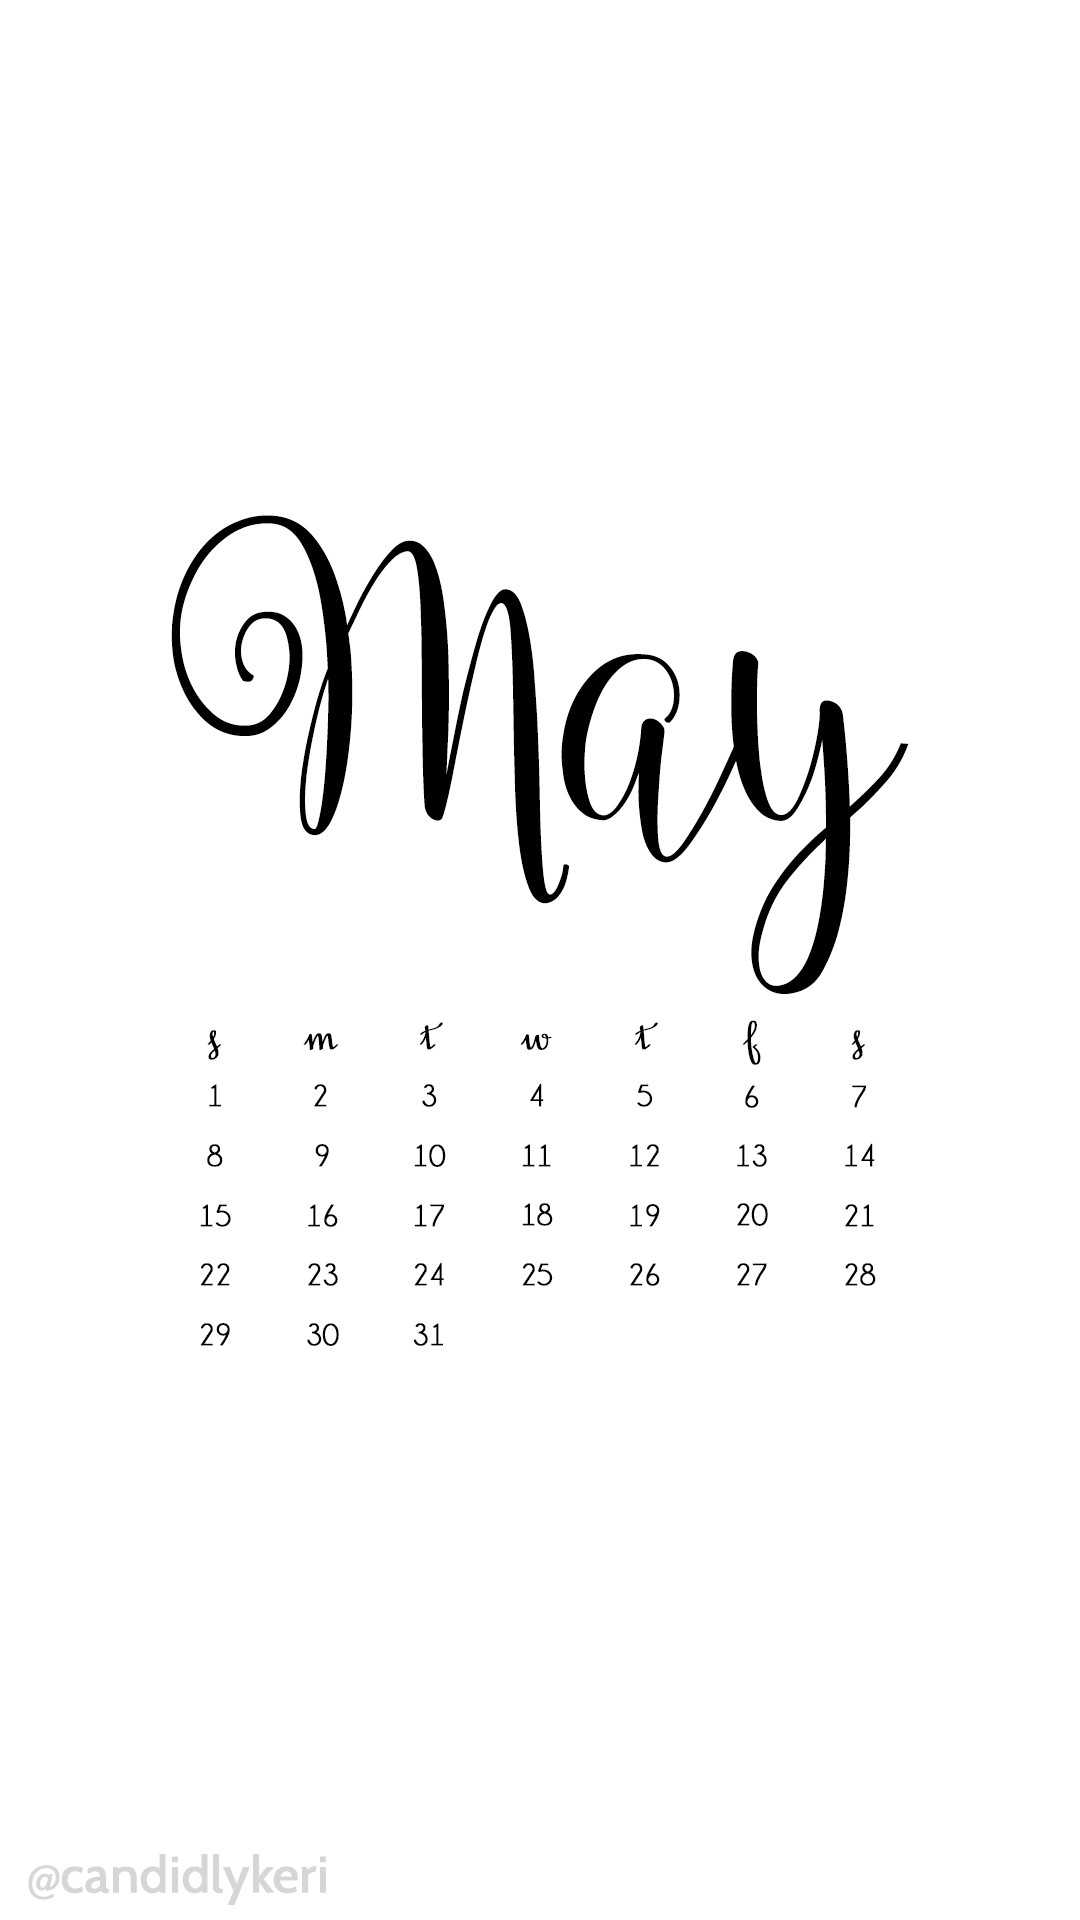 1080x1920 White and black script may 2016 calendar wallpaper free download for iPhone  android or desktop background